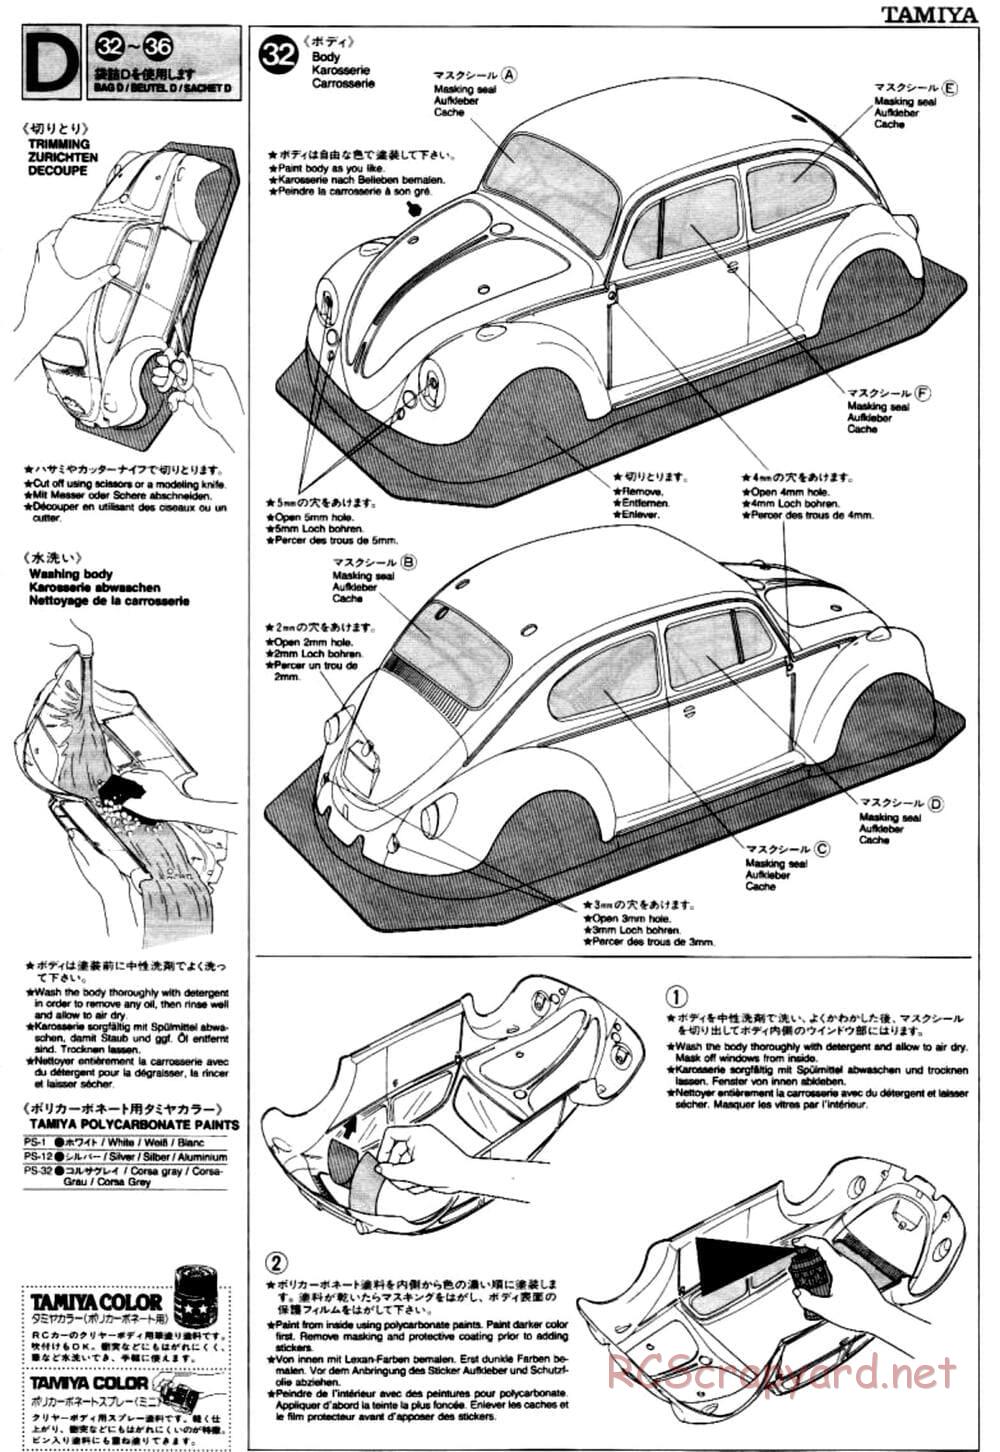 Tamiya - Volkswagen Beetle - M02L Chassis - Manual - Page 17